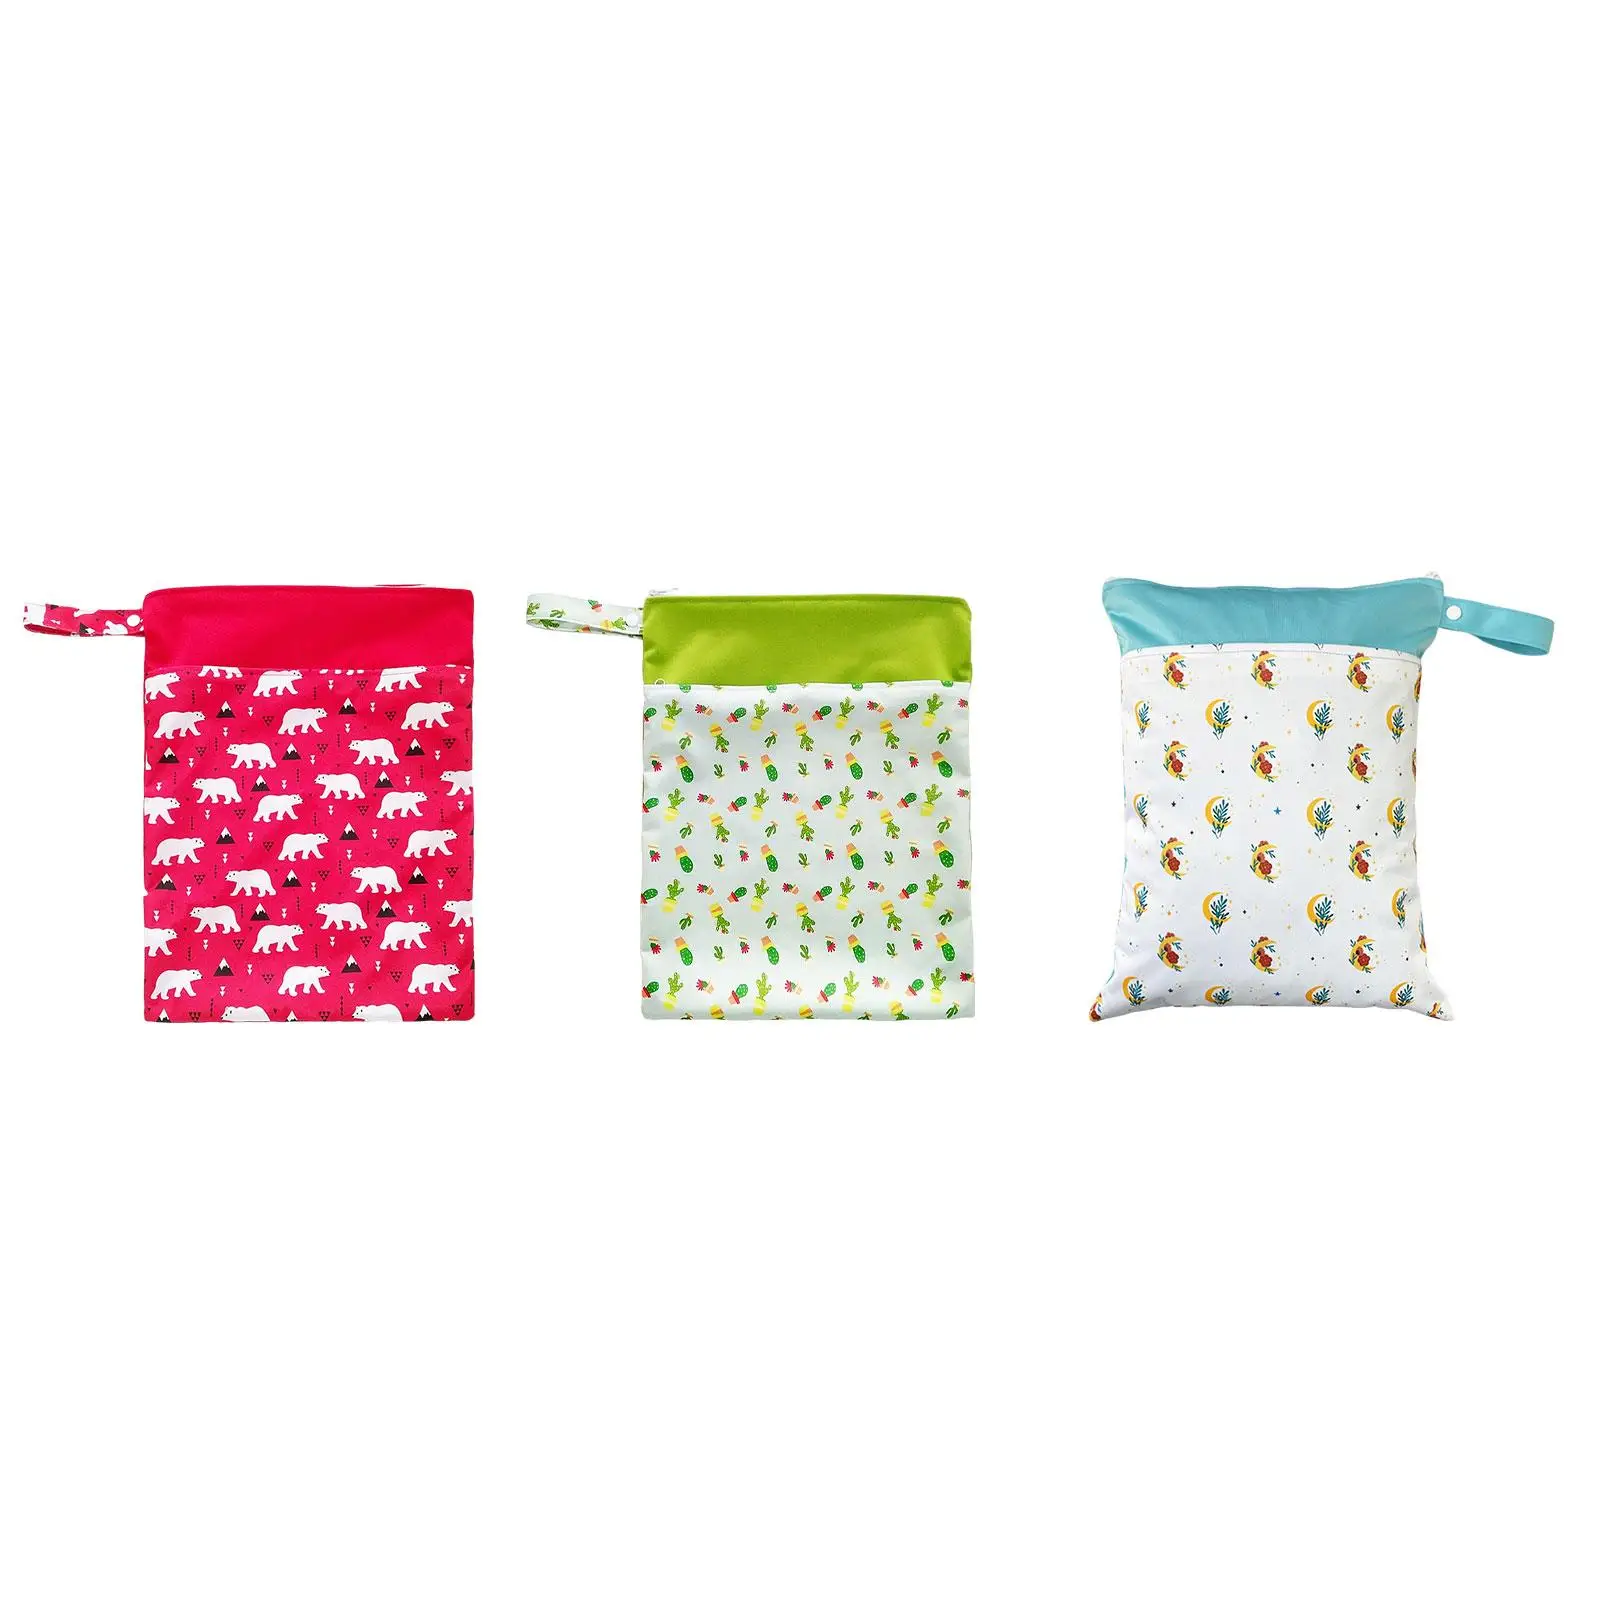 Wet and Dry Bag for Baby Cloth Diapers Portable Baby Nappy Laundry Storage Bag Double Zippers Pockets for Swimsuits Wet Clothes